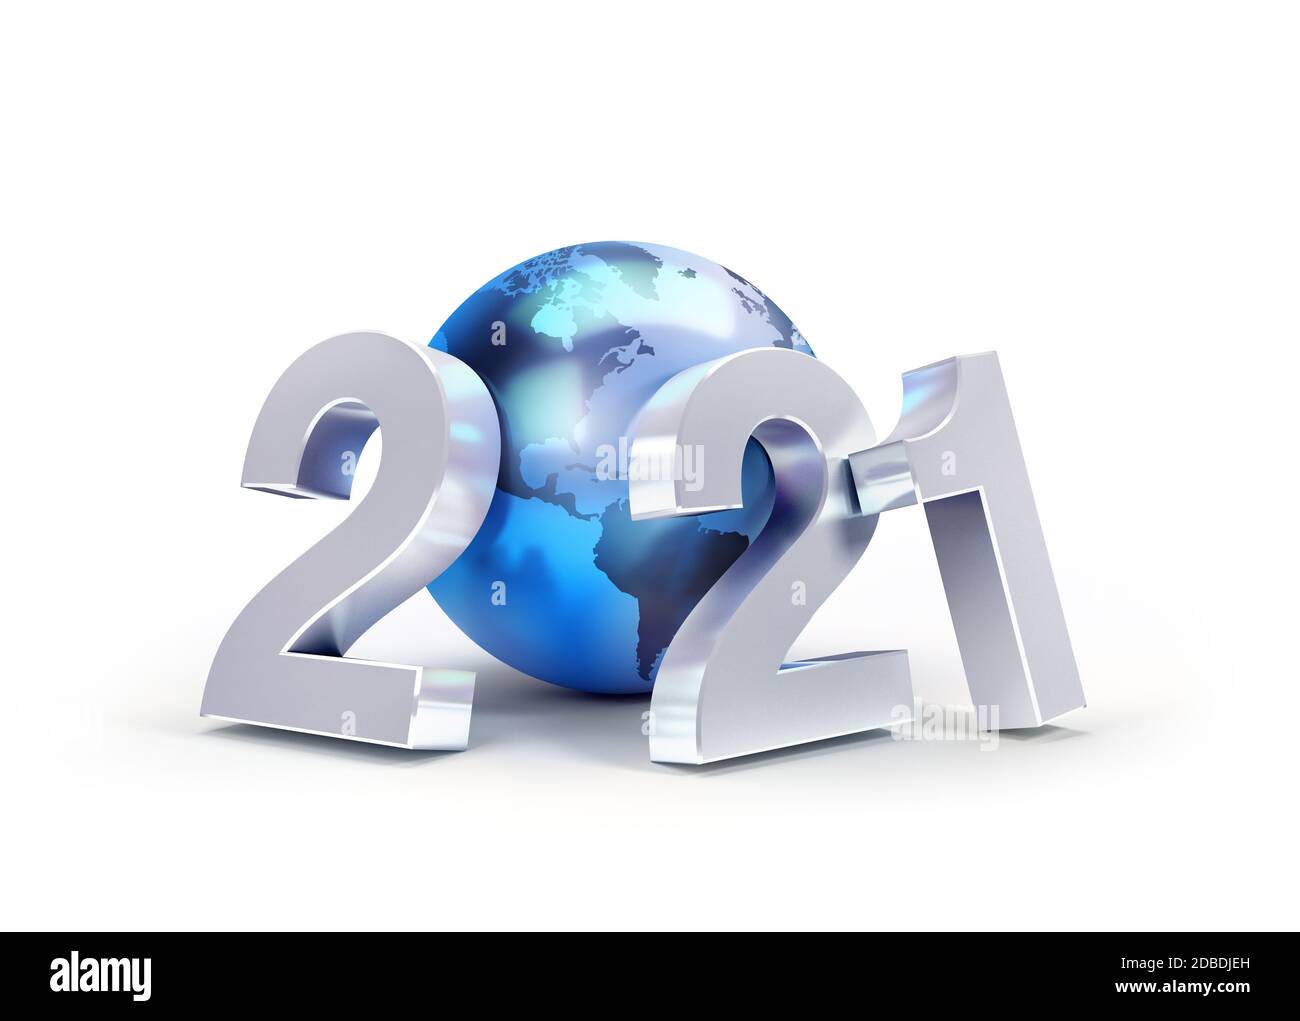 2021 New Year date number composed with a blue planet earth, focused on America, isolated on white - 3D illustration Stock Photo